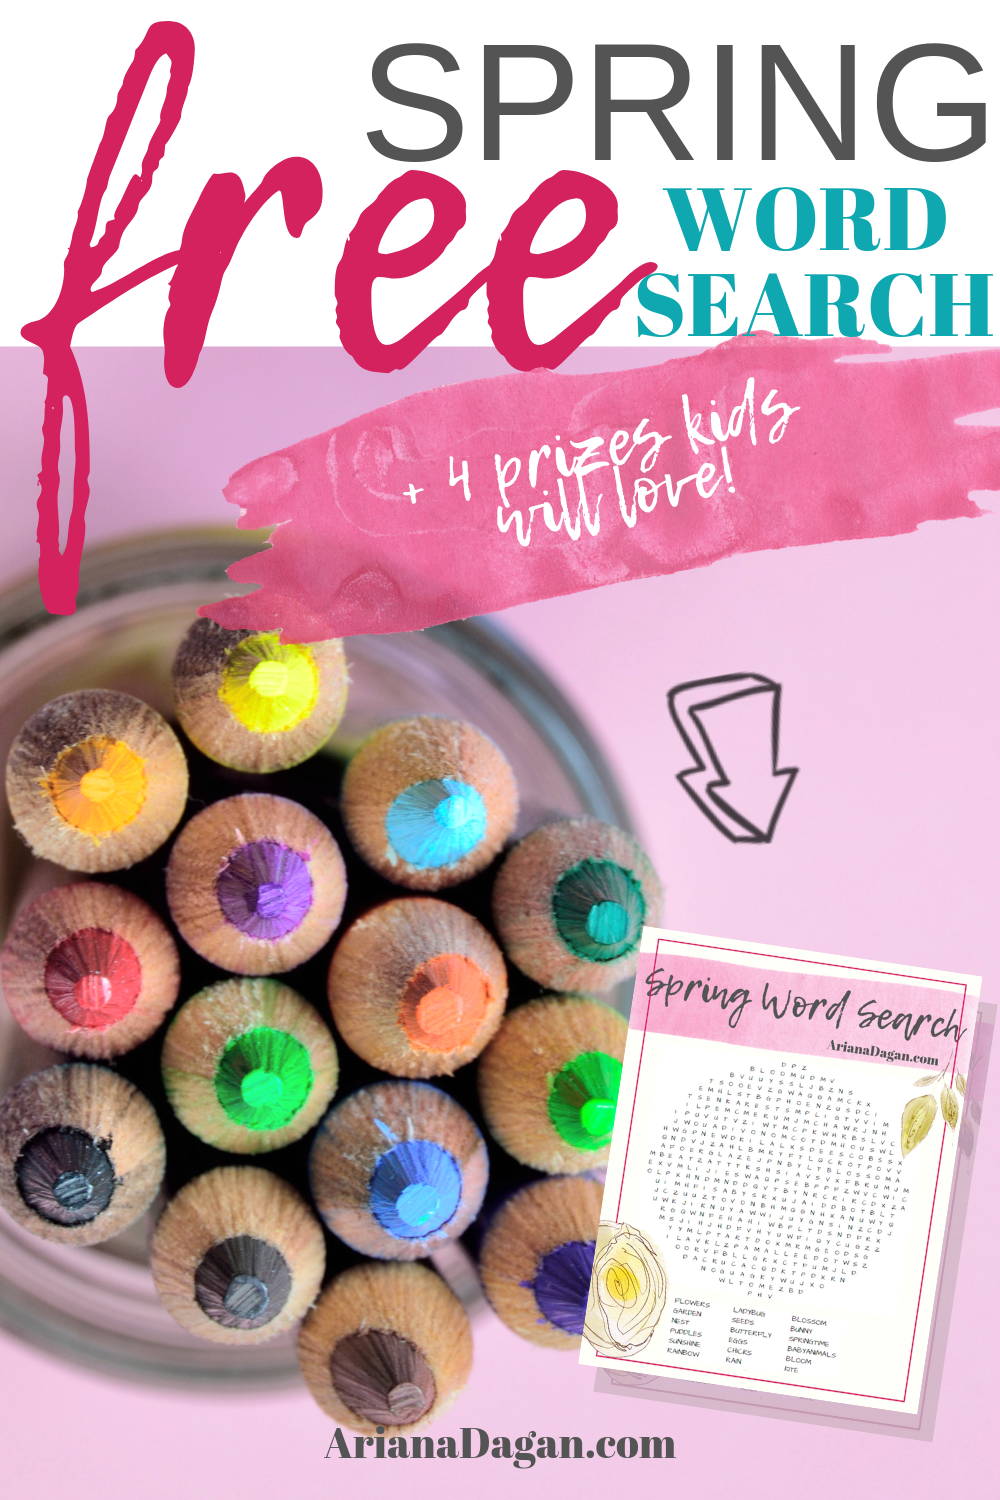 Free Spring Word Search printable by ariana dagan